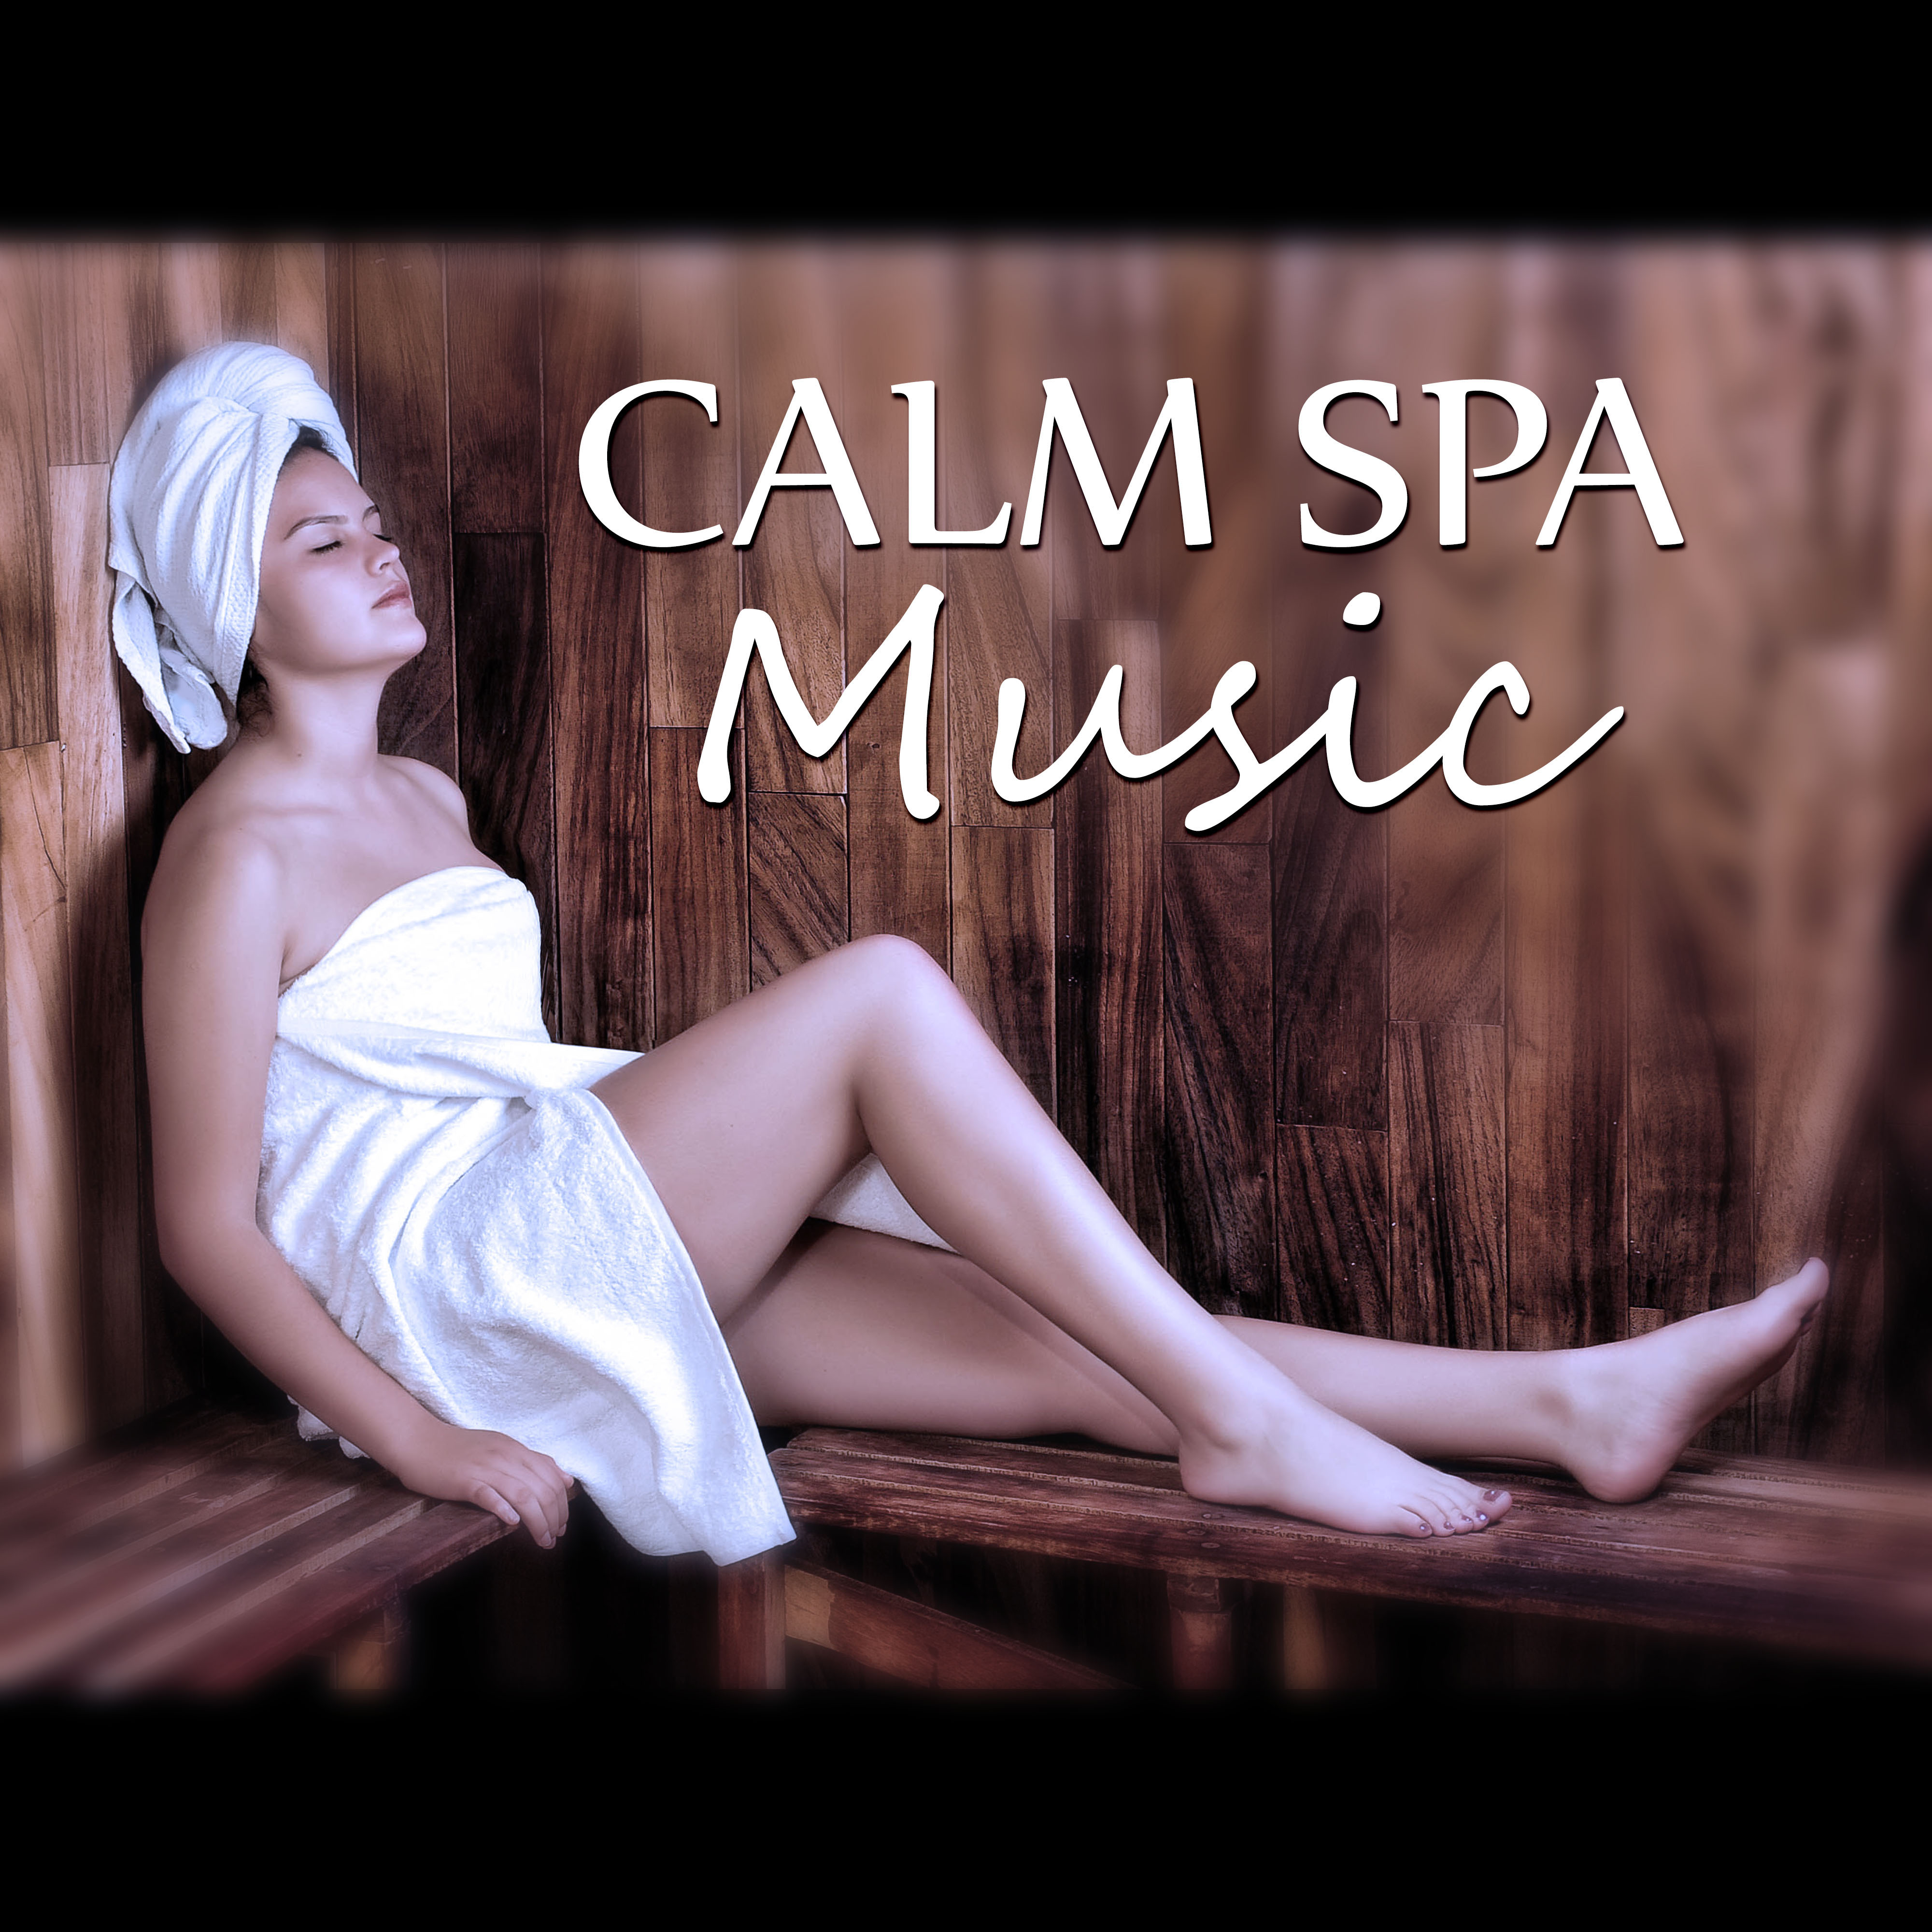 Calm Spa Music  Inner Silence, New Age, Calmness, Massage Music for Aromatherapy, Ocean Waves, Soothing Music, Peaceful Spa, Rain, Nature Sounds